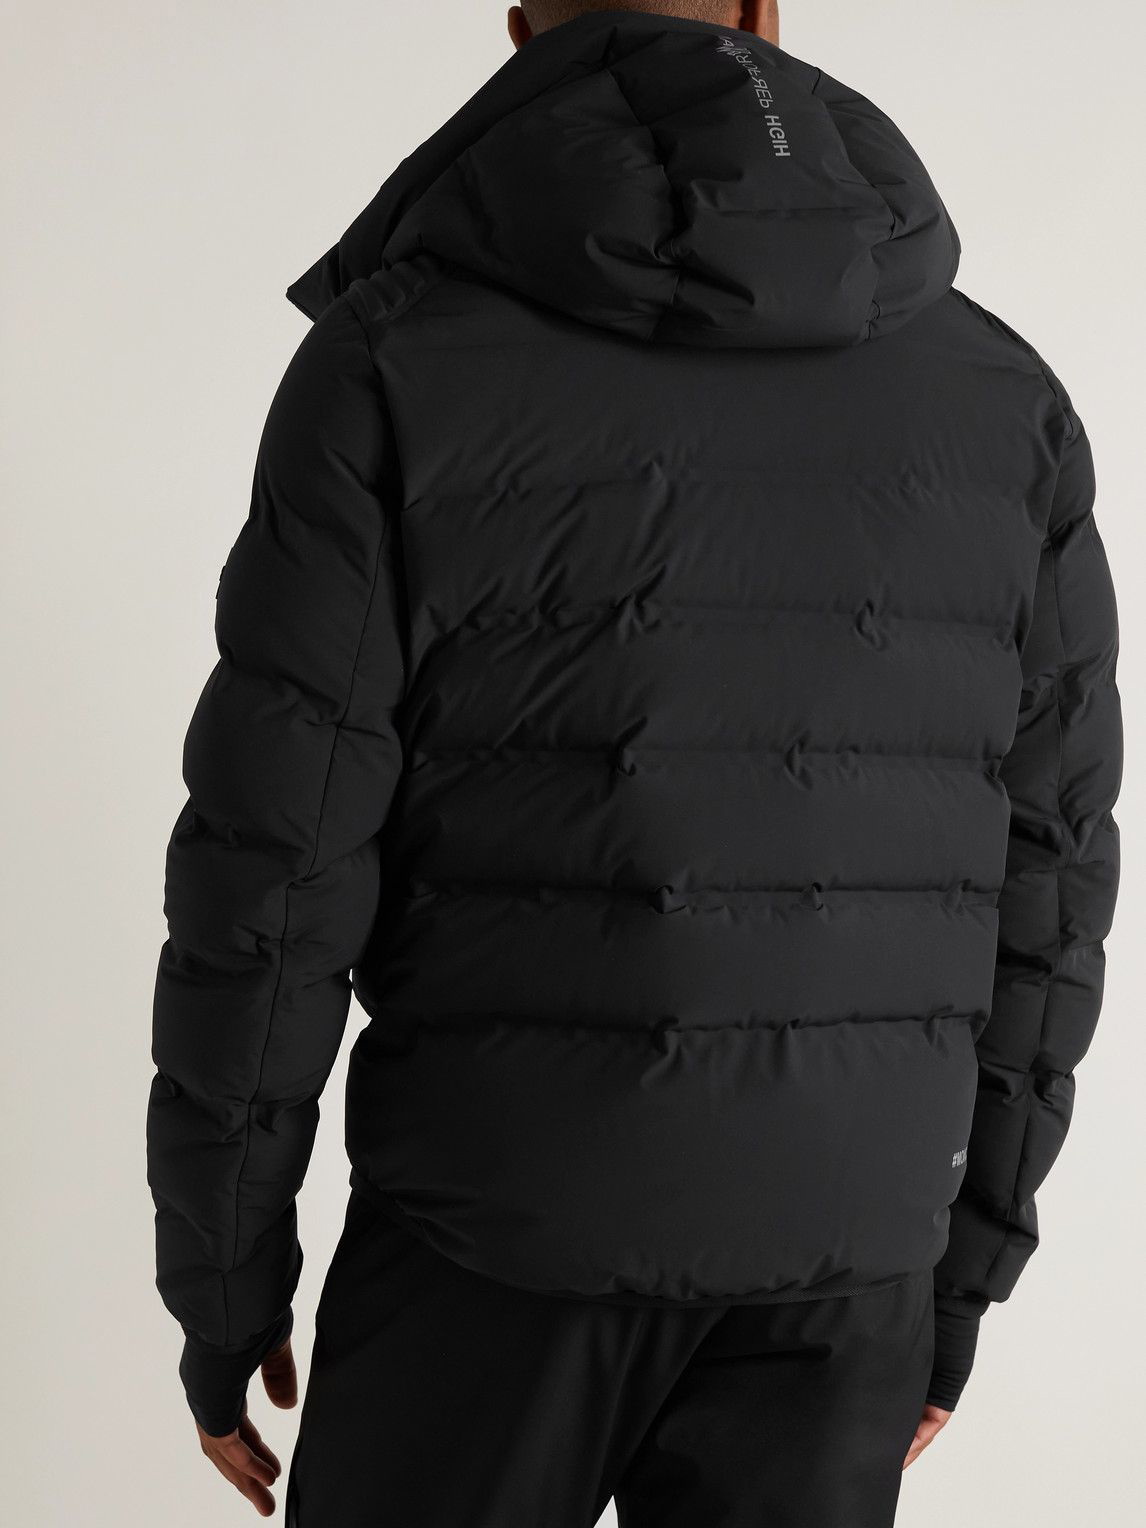 MONCLER GRENOBLE Lagorai Quilted Hooded Down Ski Jacket for Men